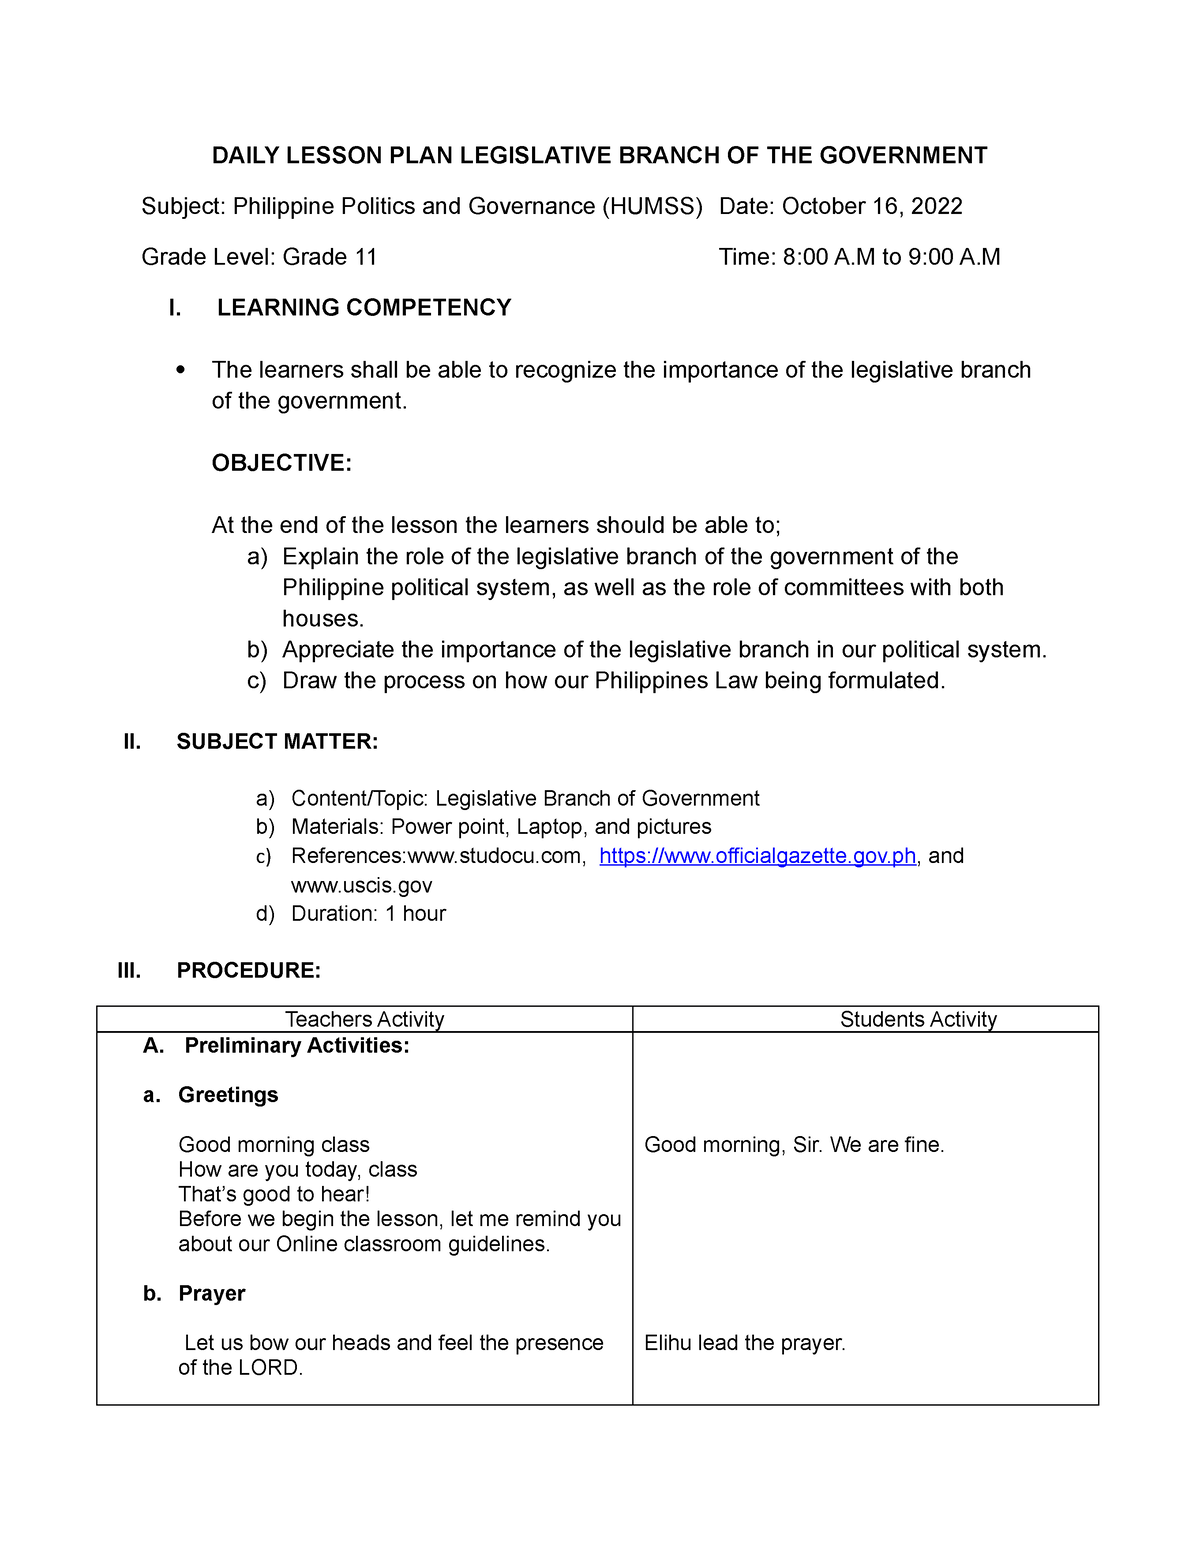 Daily Lesson Plan Final Daily Lesson Plan Legislative Branch Of The Government Subject 3959